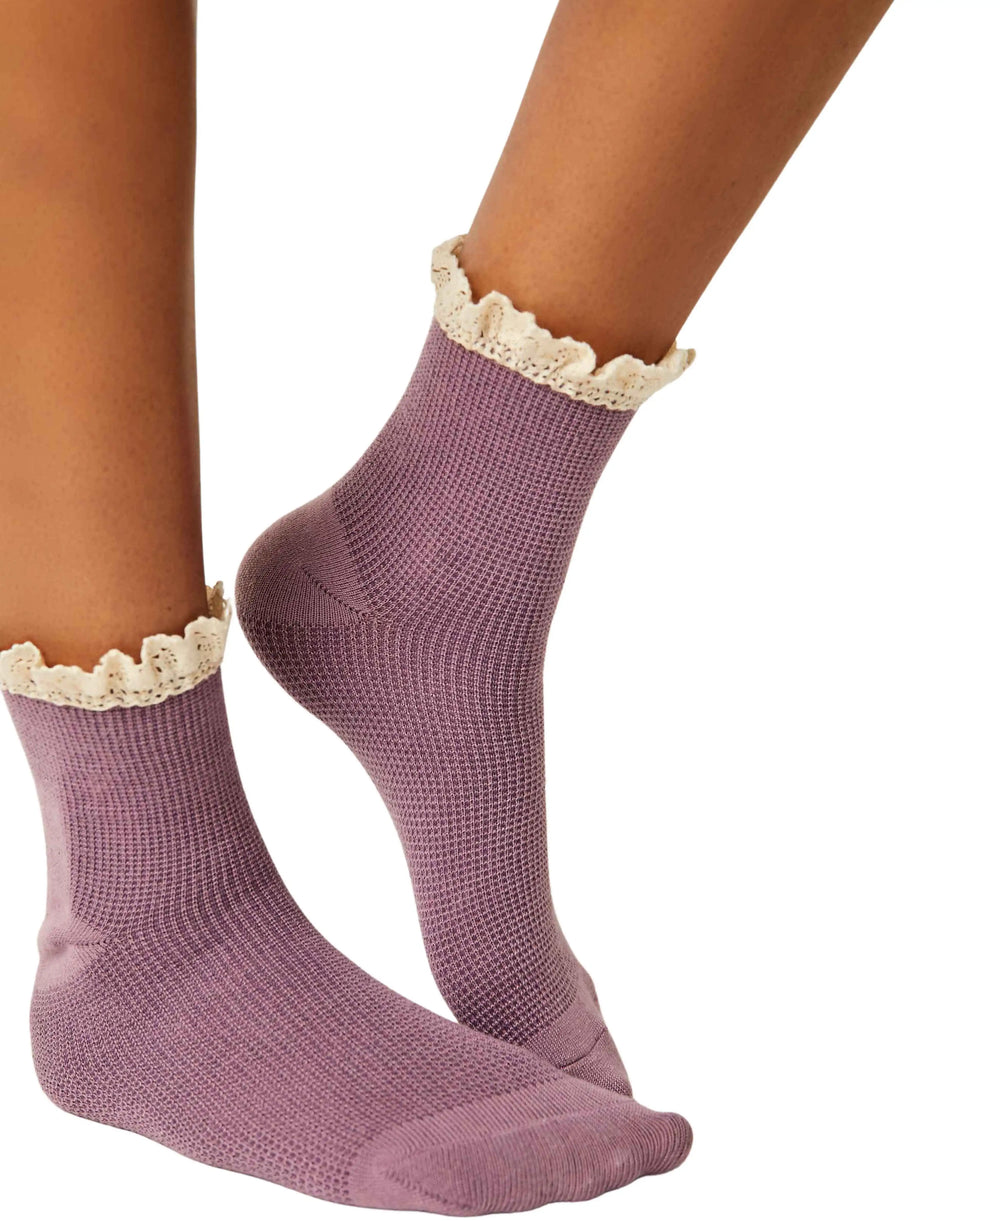 Waffle Knit Ankle Socks in Plum - Madison&